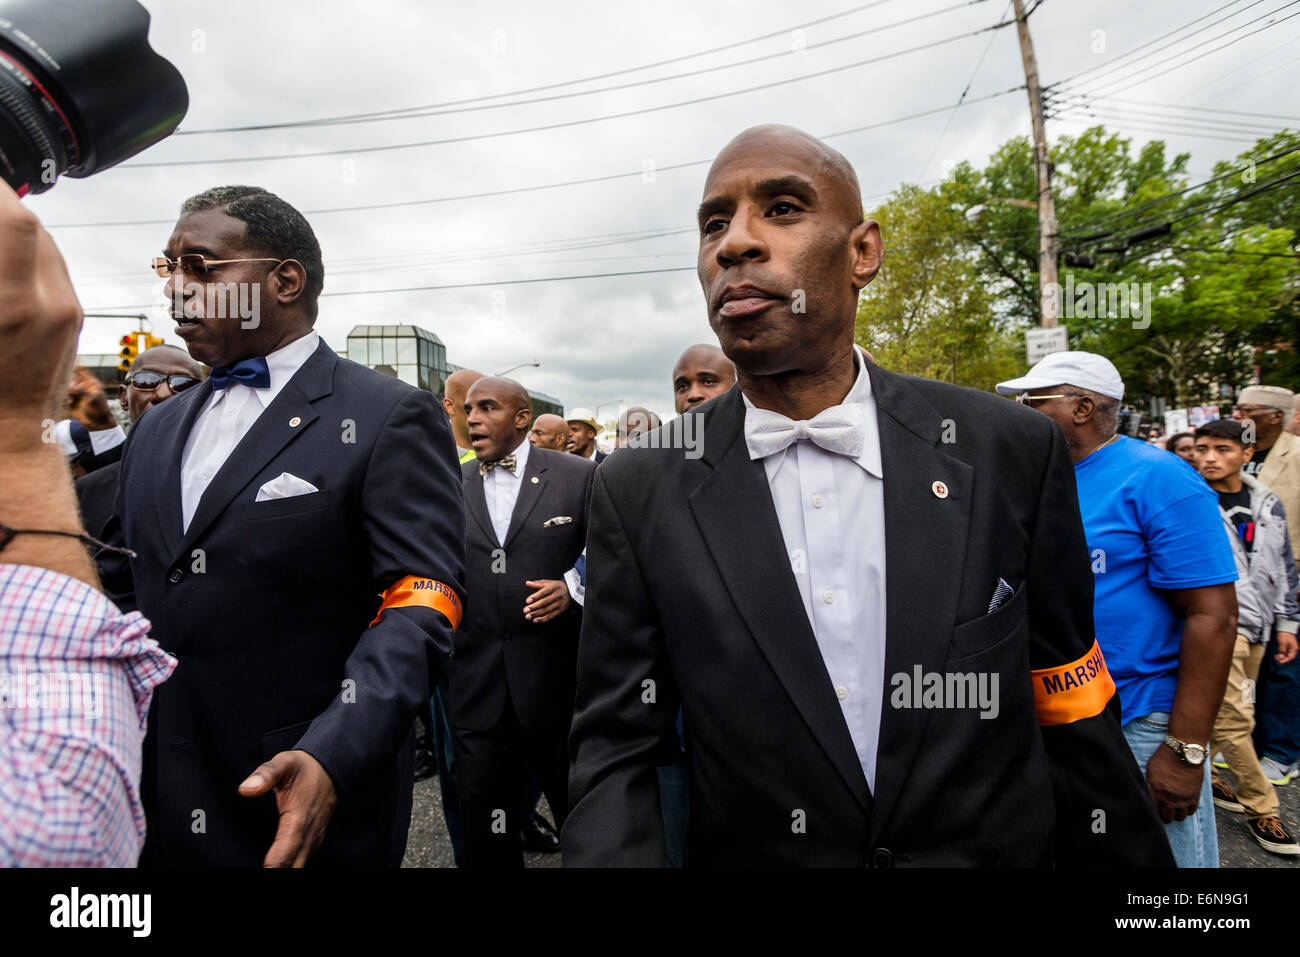 Staten Island, NY - Members of the Nation of Islam server as marshals as thousands marched through Stapleton, Staten IslandI to Stock Photo